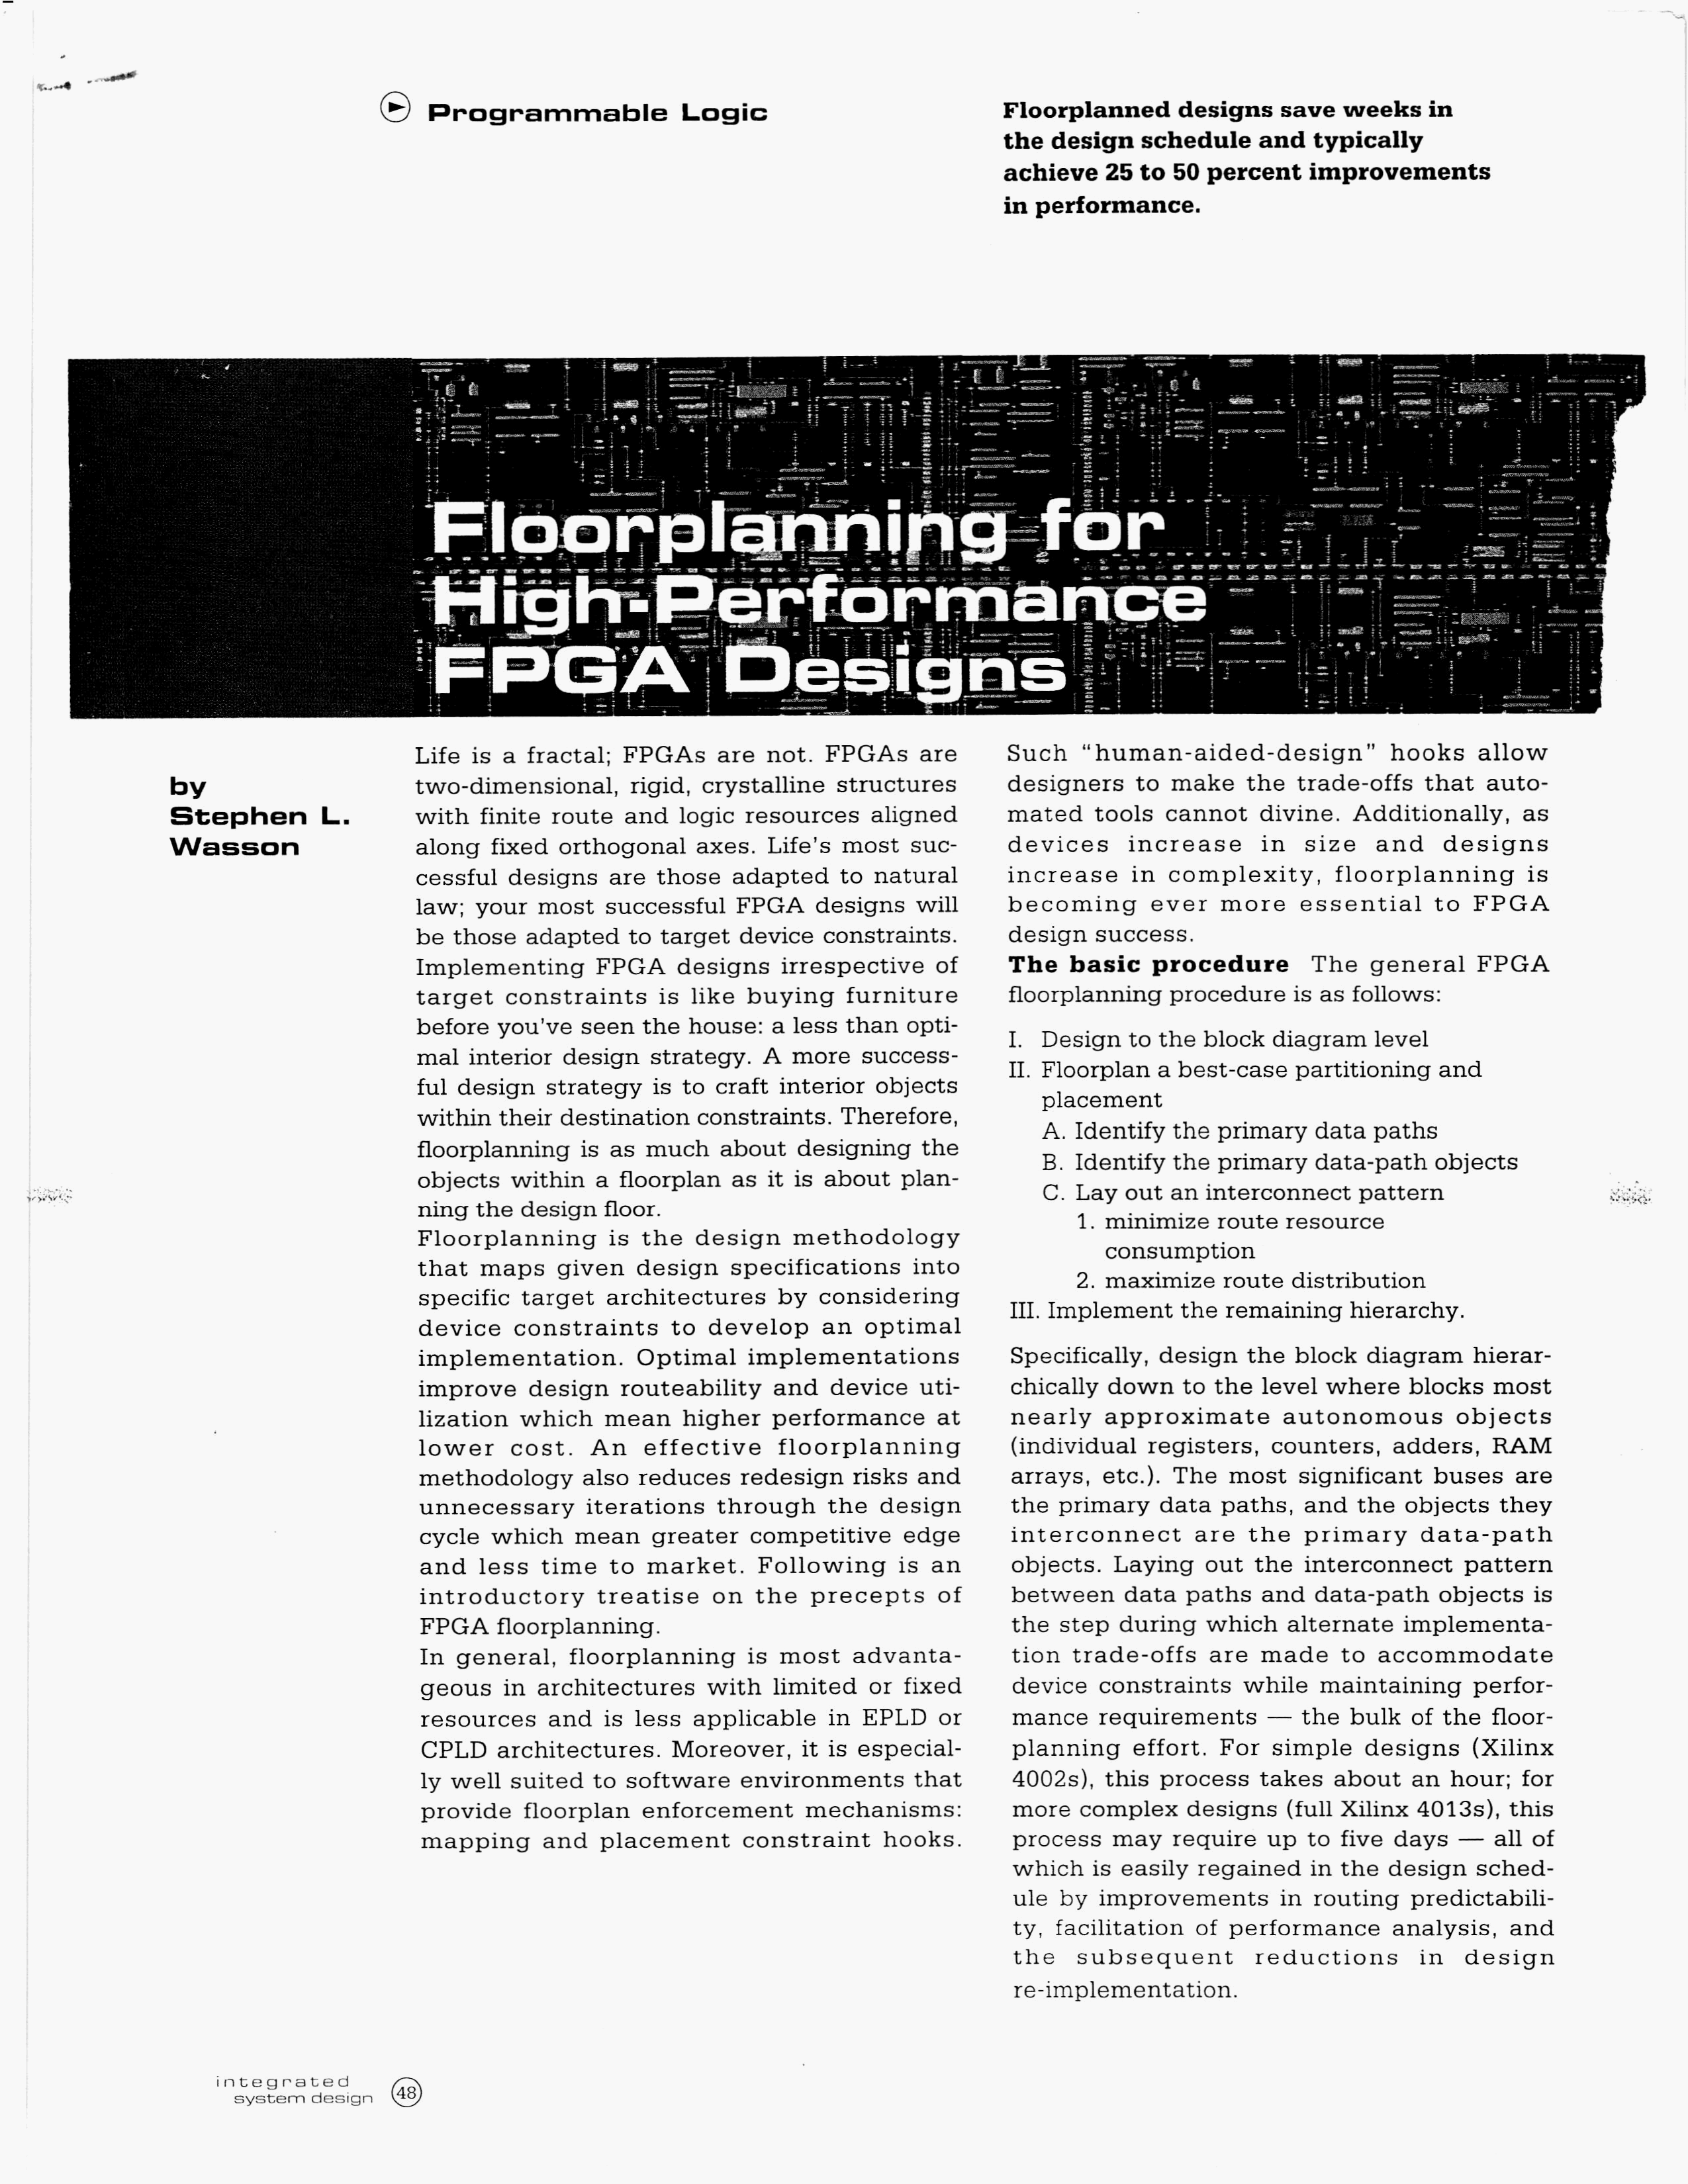 * Floorplanning for High-Performance FPGA Designs, Stephen Wasson, March 1995, Integrated System Design page 1 *